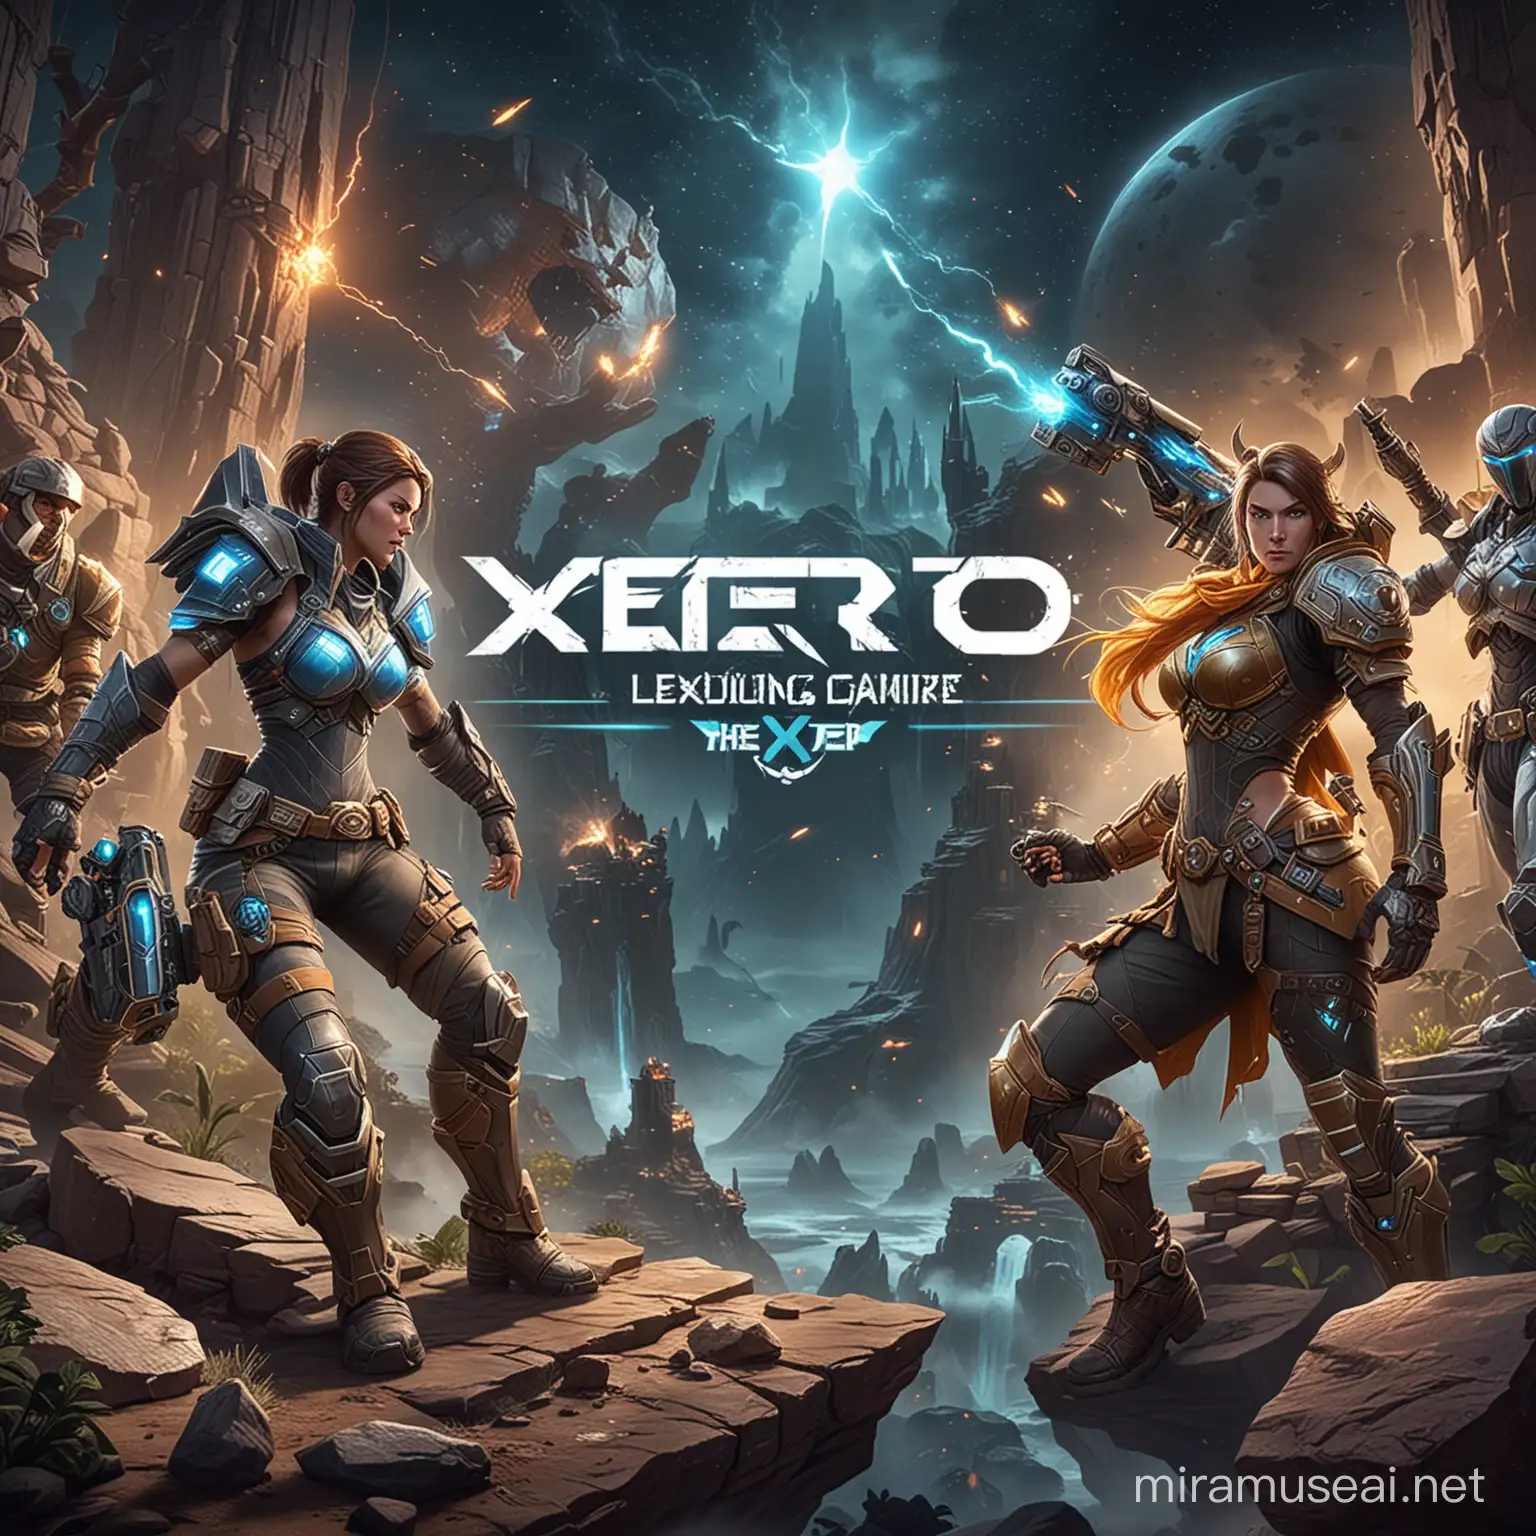 🎮 It's time to power up! We're teaming up with @XterioGames to bring you the ultimate gaming experience. Join us on this thrilling journey with $Xter leading the charge. Keep an eye out for exciting updates and rewards! 🚀🎮 #GamingWorld #XterioGames